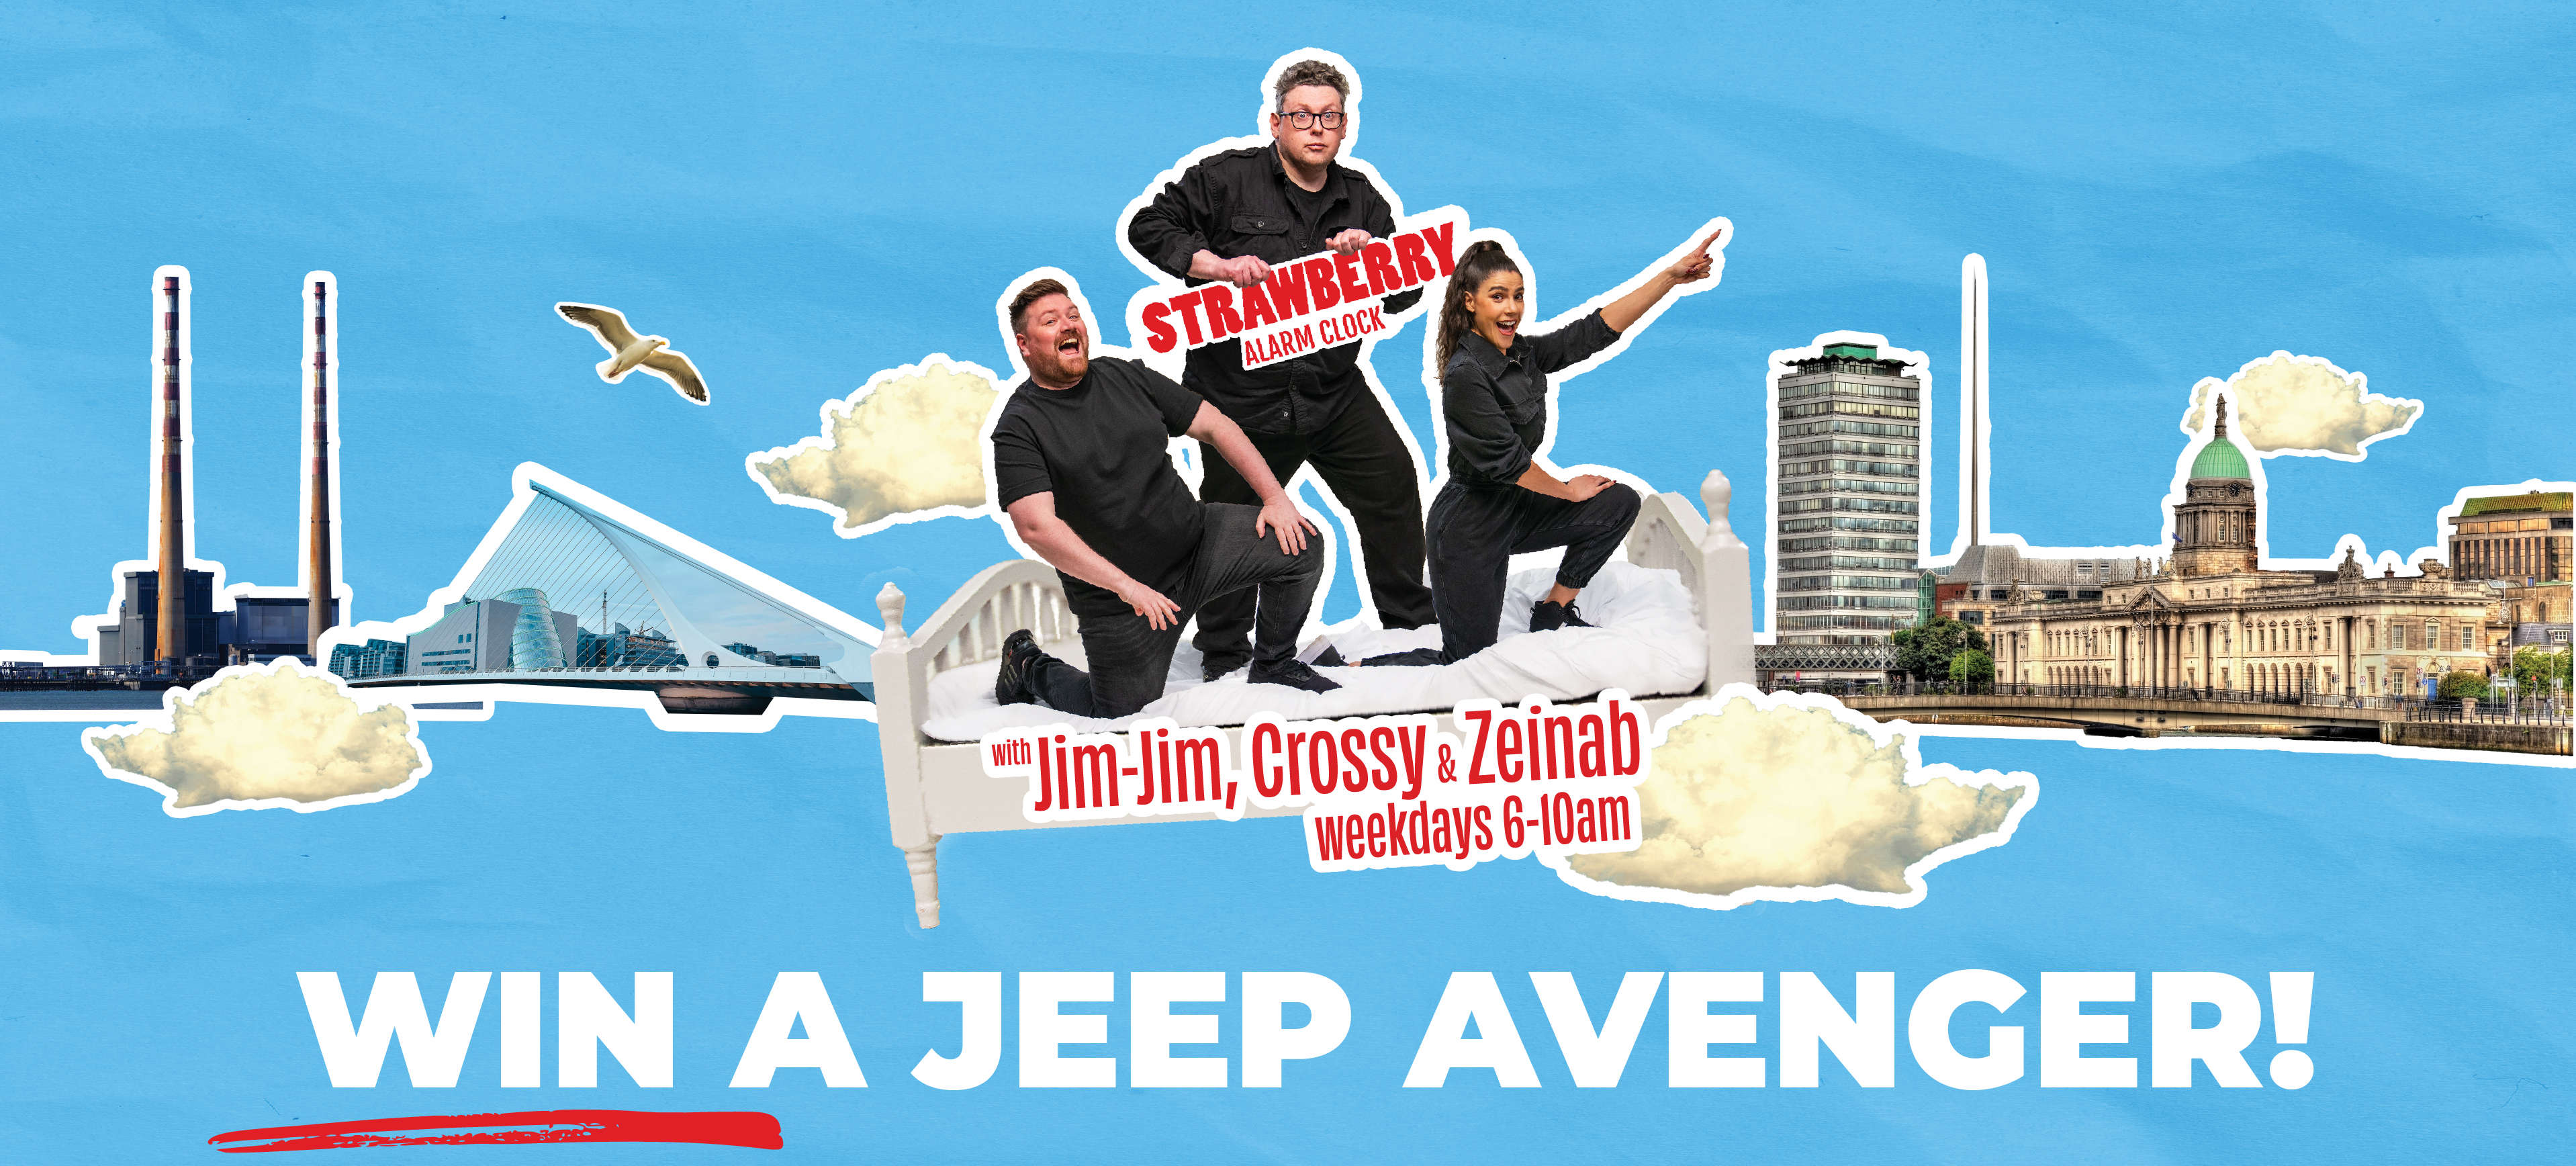 Strawberry Alarm Clock's Jim-Jim, Corssy, and Zeinab. Win a Jeep Avenger